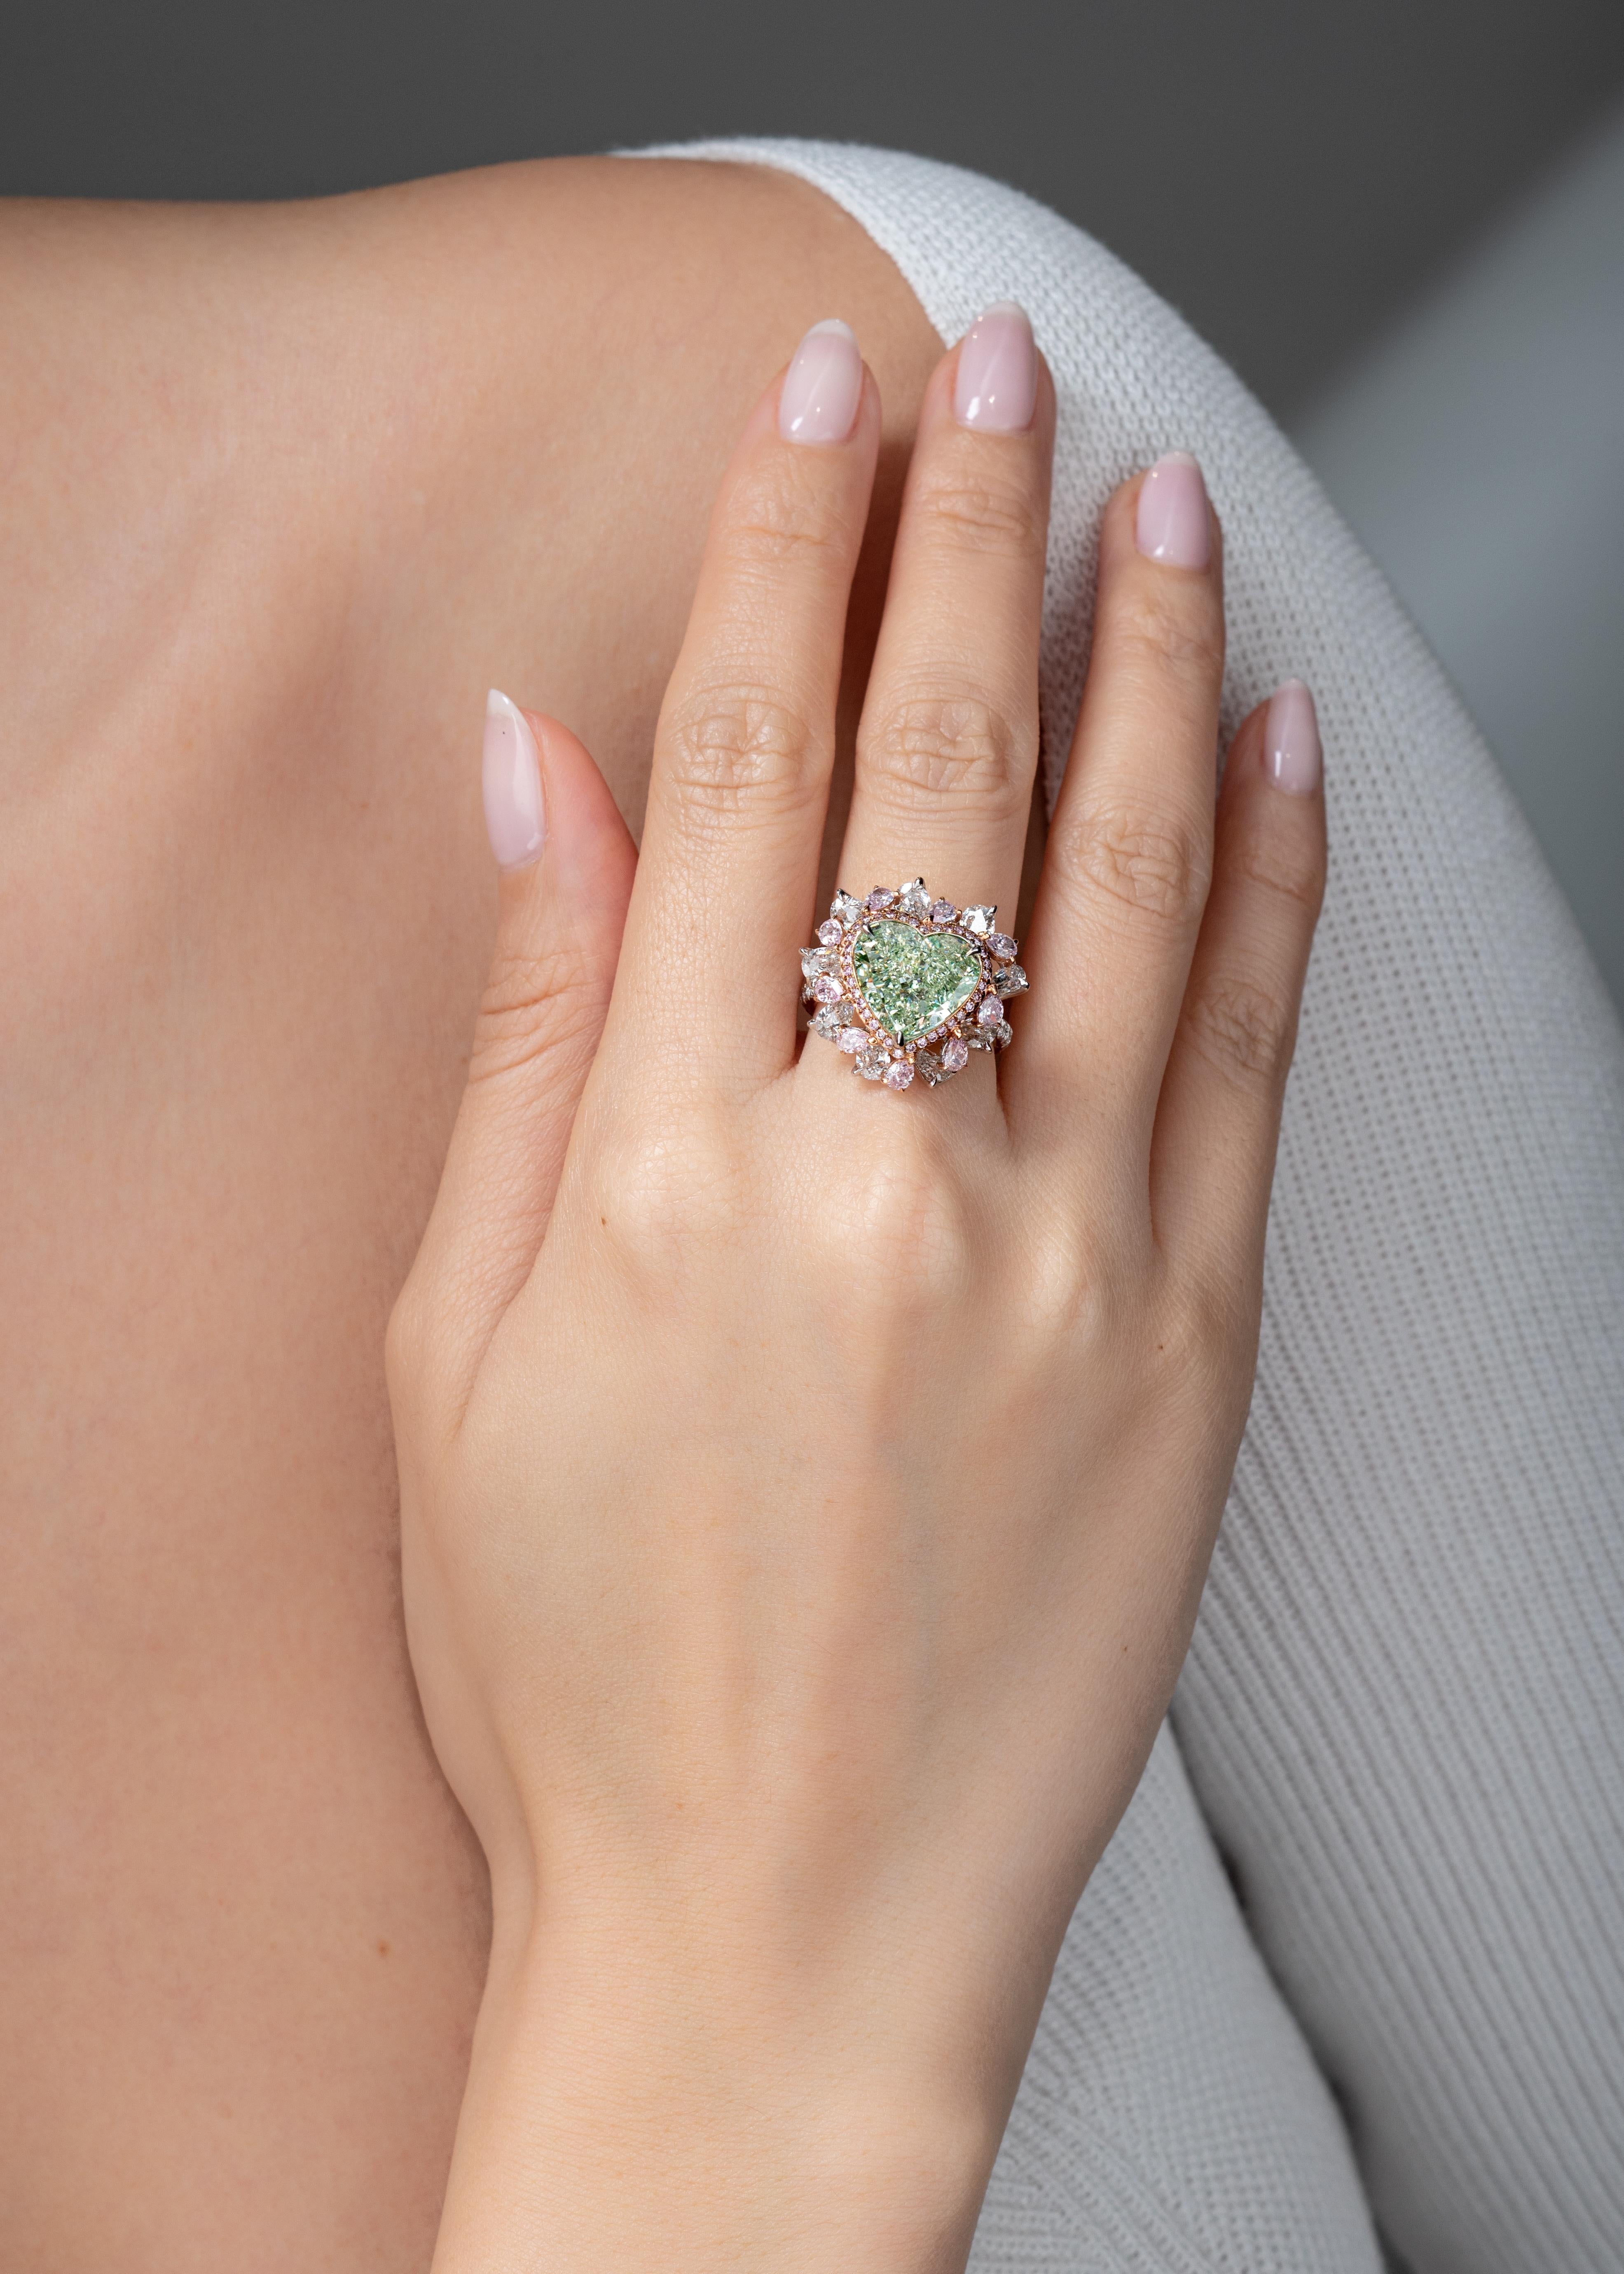 A 5.29 carat Fancy Yellow Green heart shape diamond with VS2 clarity (GIA Certificate #5171179493) is the feature stone of this Vihari Jewels ring. Green diamonds are symbolic of nature and harmony - attributes that Vihari wanted to highlight in her